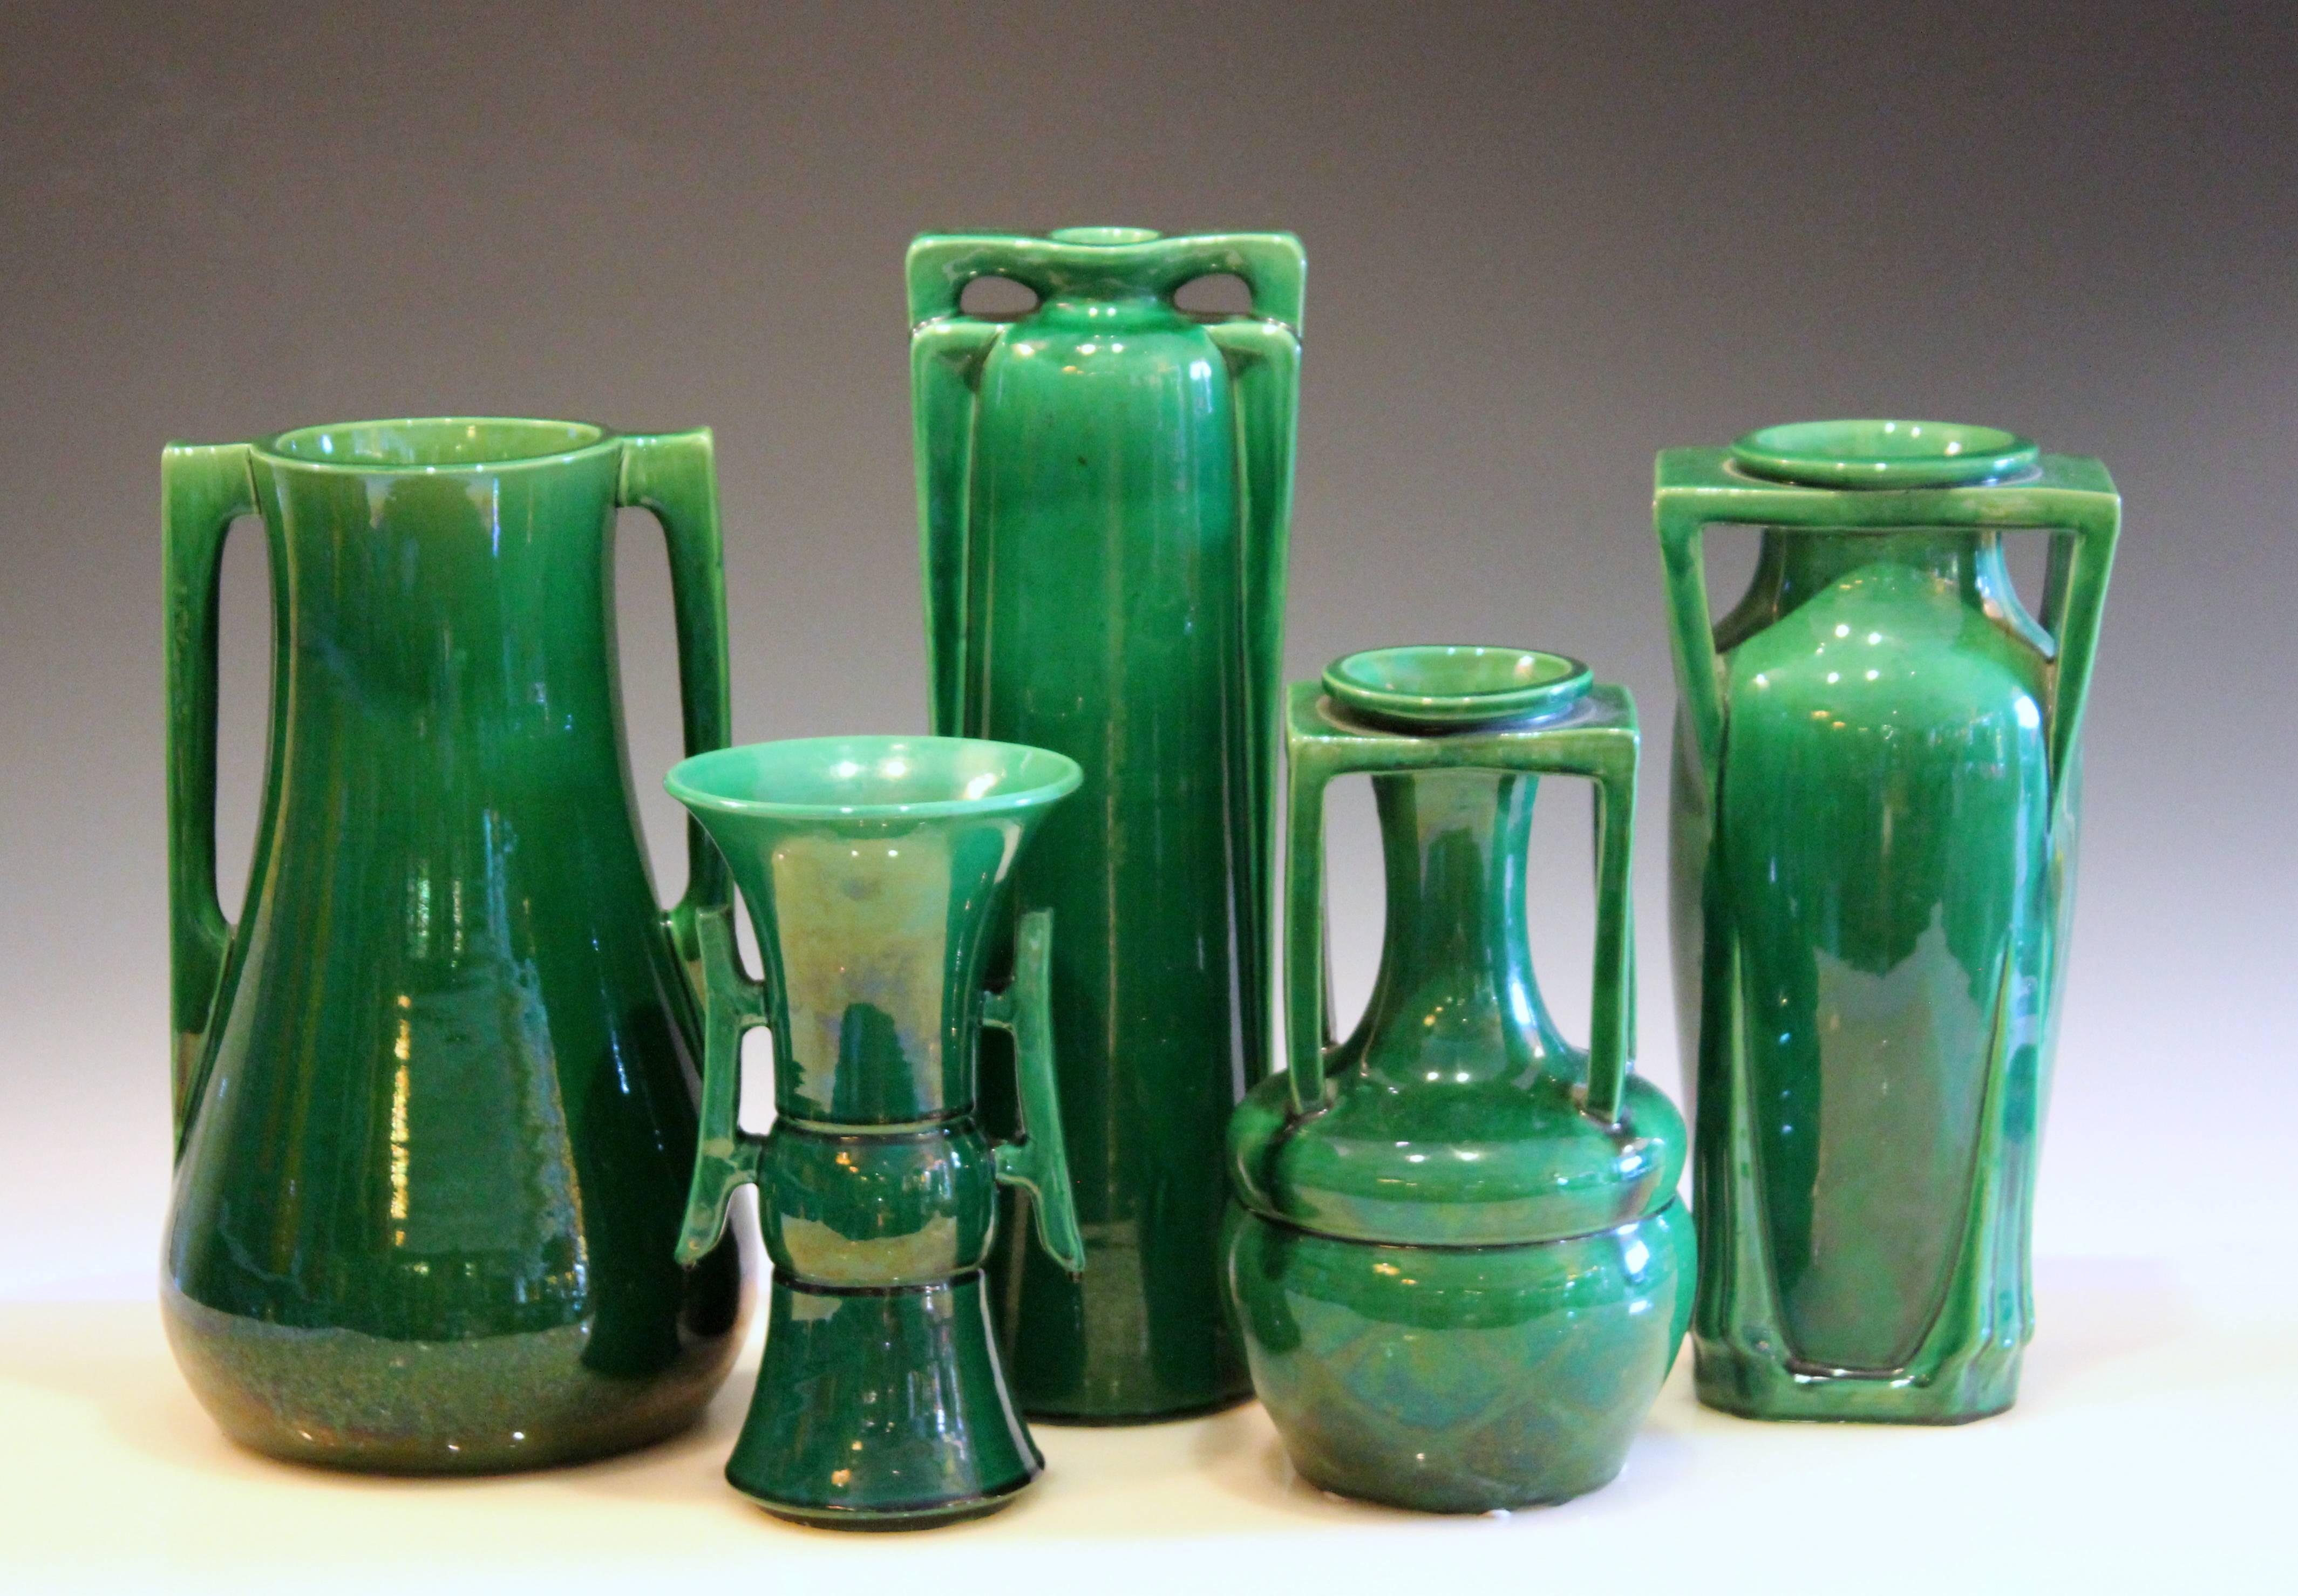 Awaji Pottery Art Deco Architectural Buttress Handled Vases, circa 1920 4